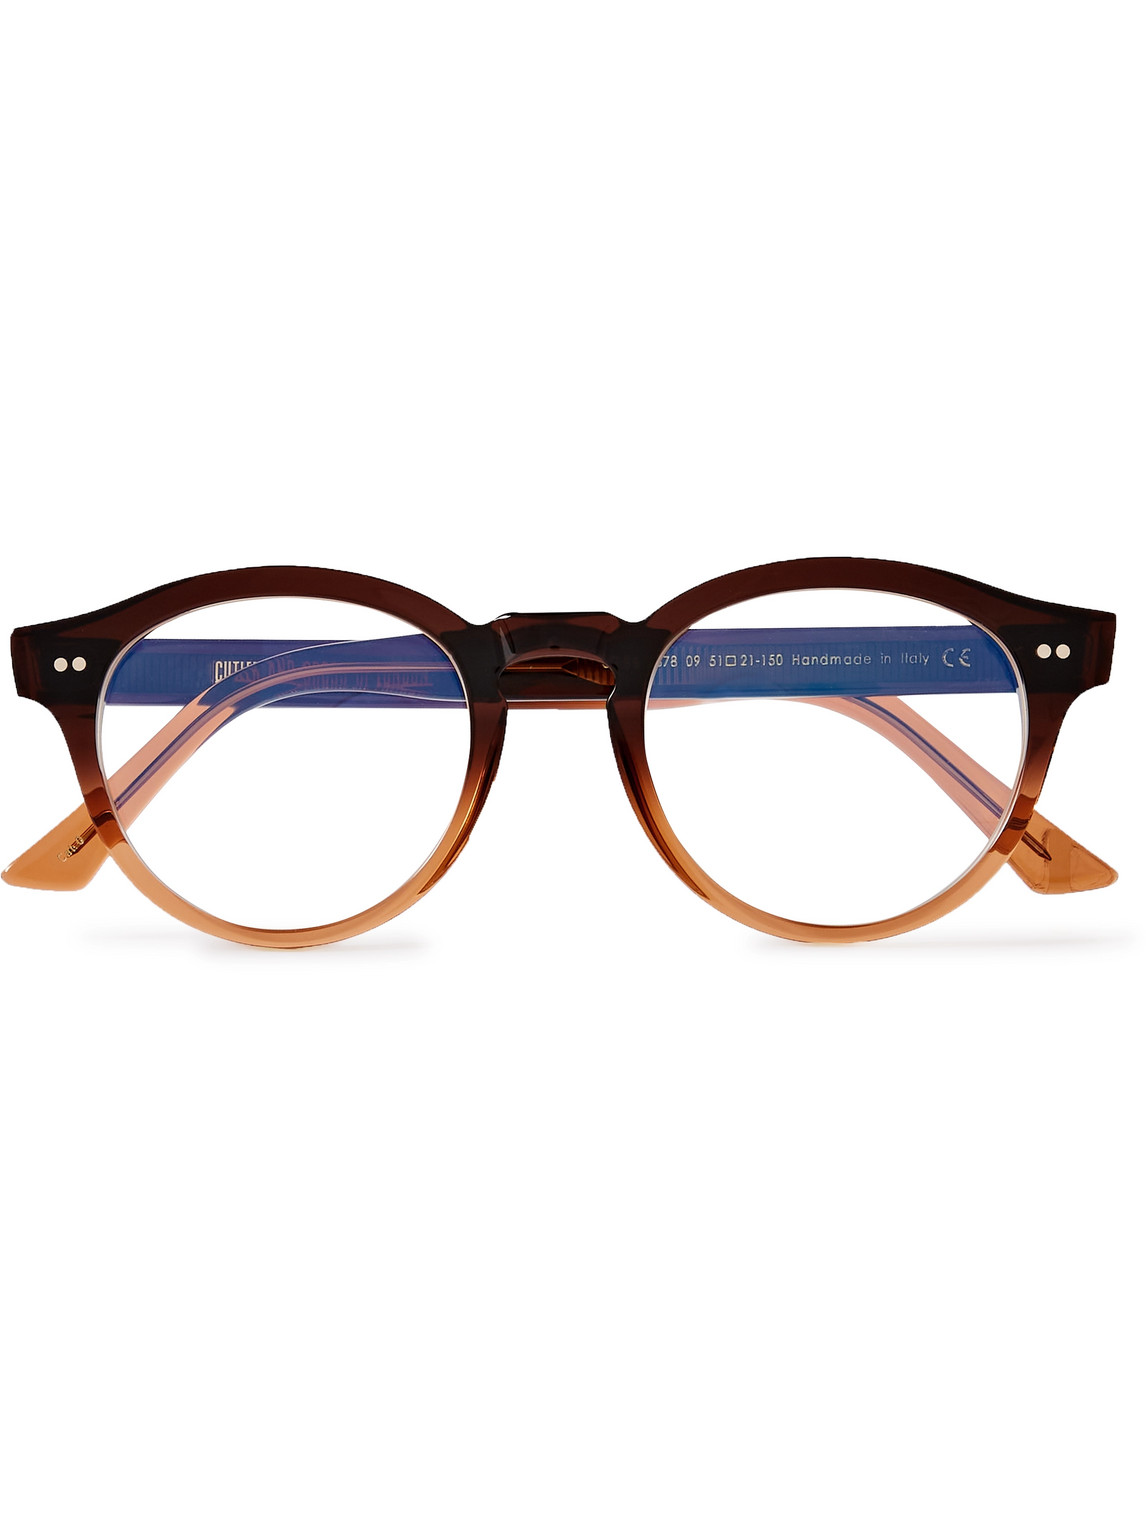 Cutler And Gross 1378 Round-frame Acetate Blue Light-blocking Optical Glasses In Brown